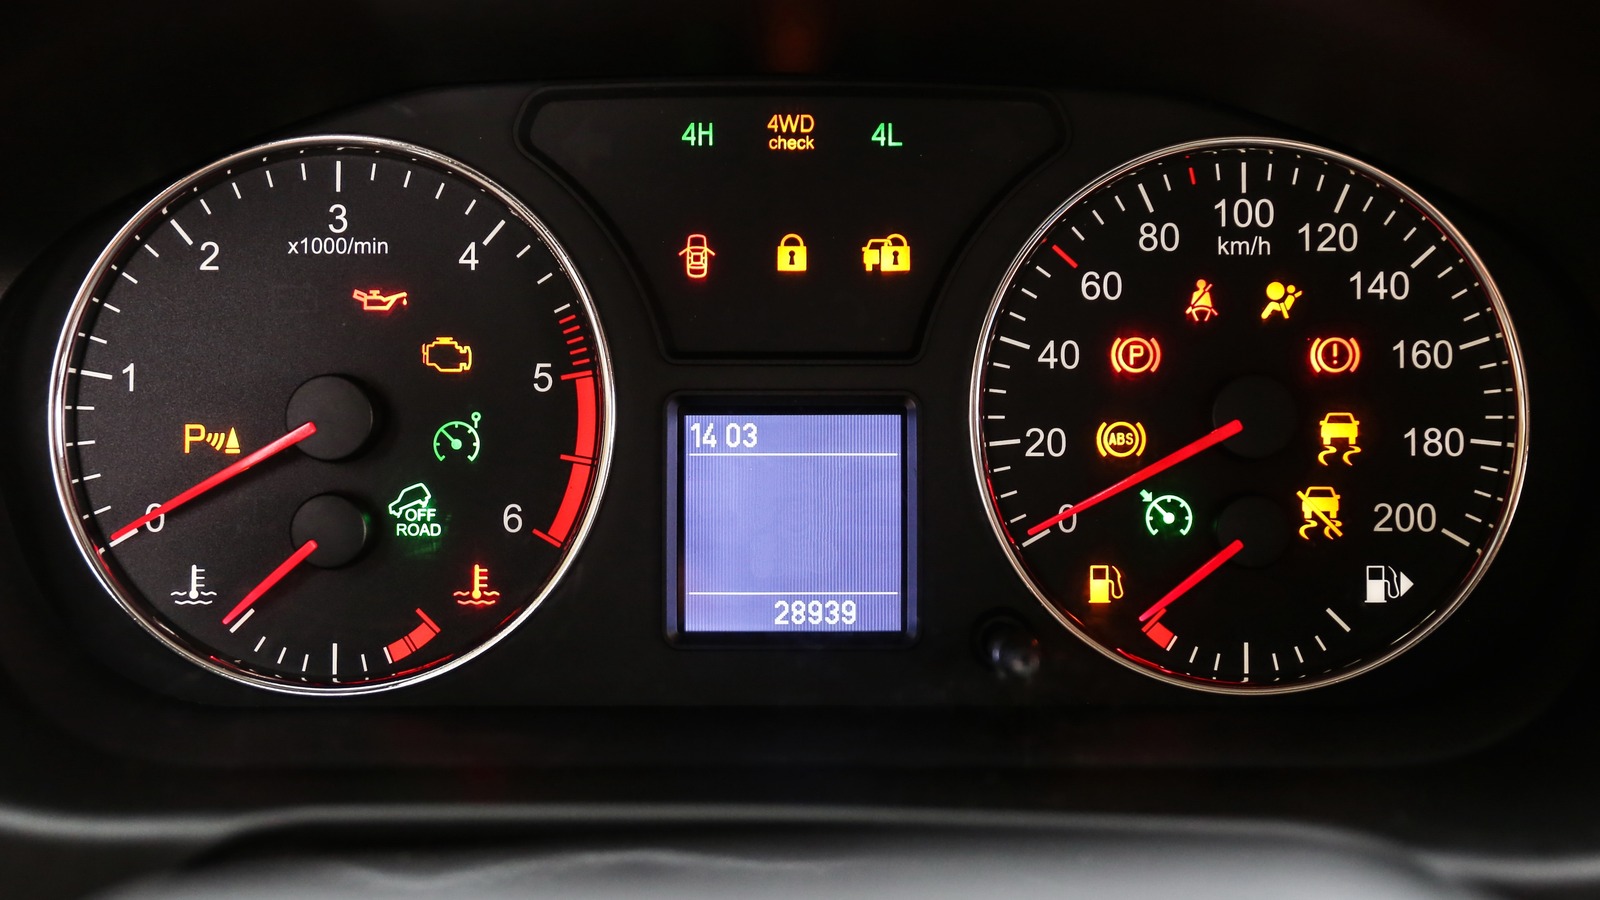 5 Essential Things to Know About Your Car's Dashboard